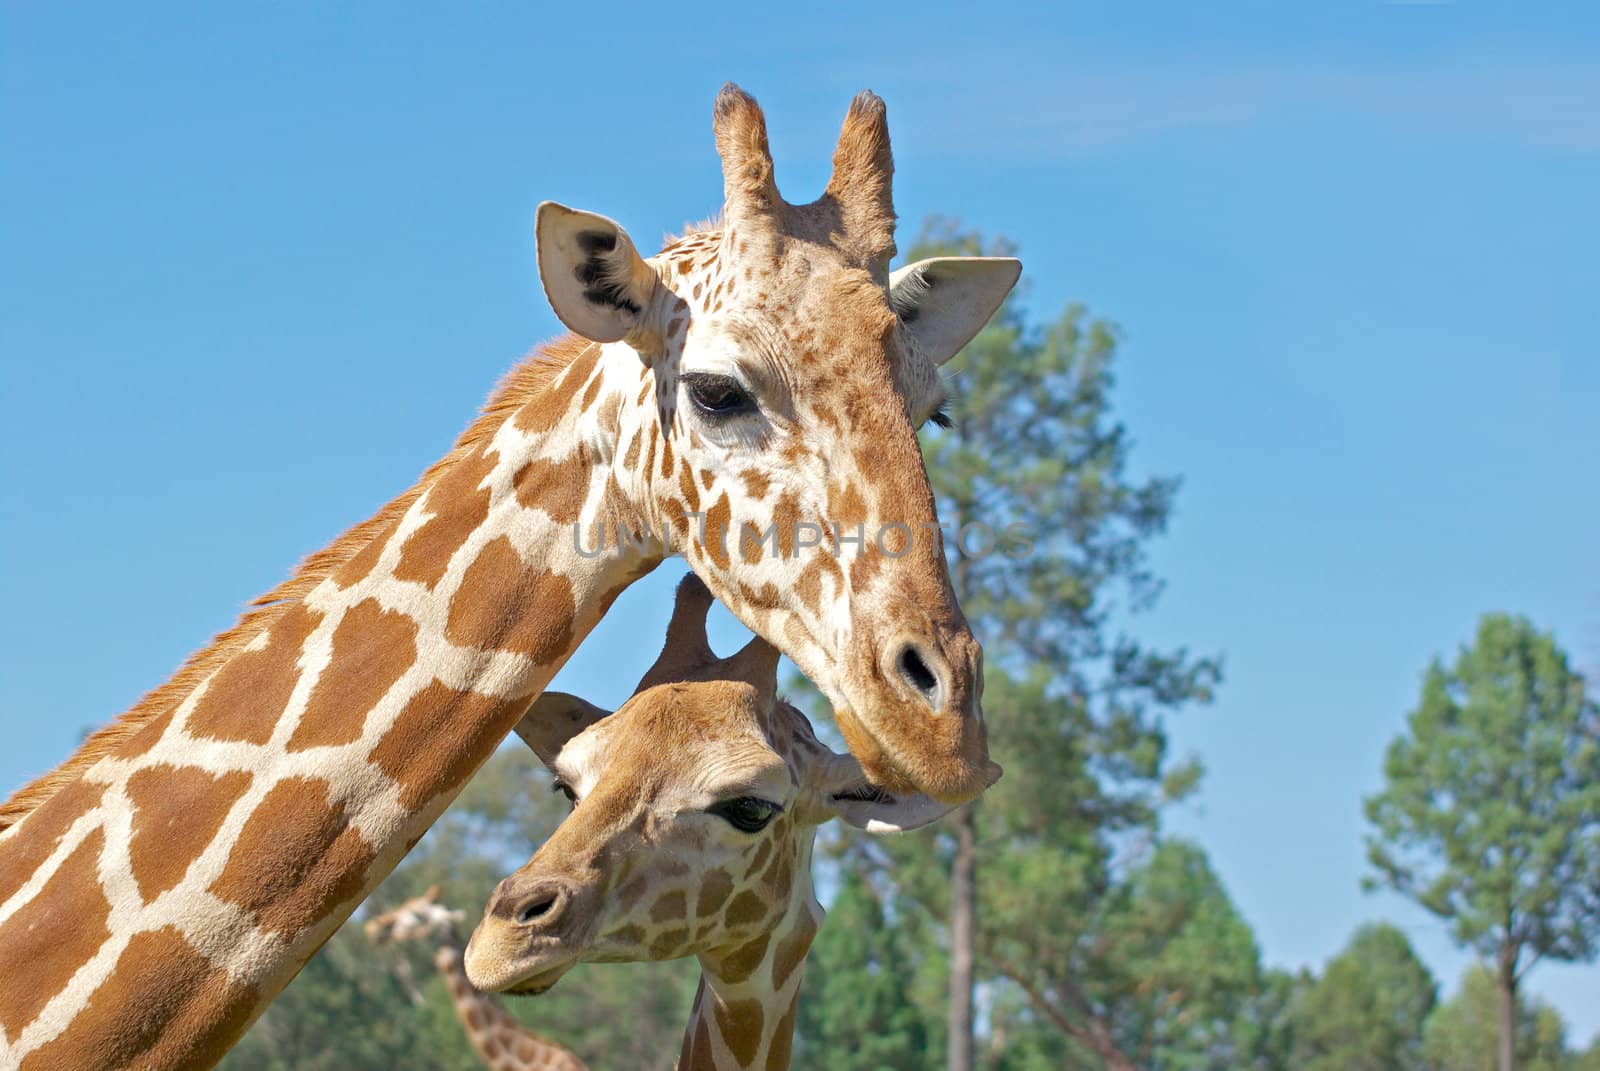 a mother and baby giraffe together